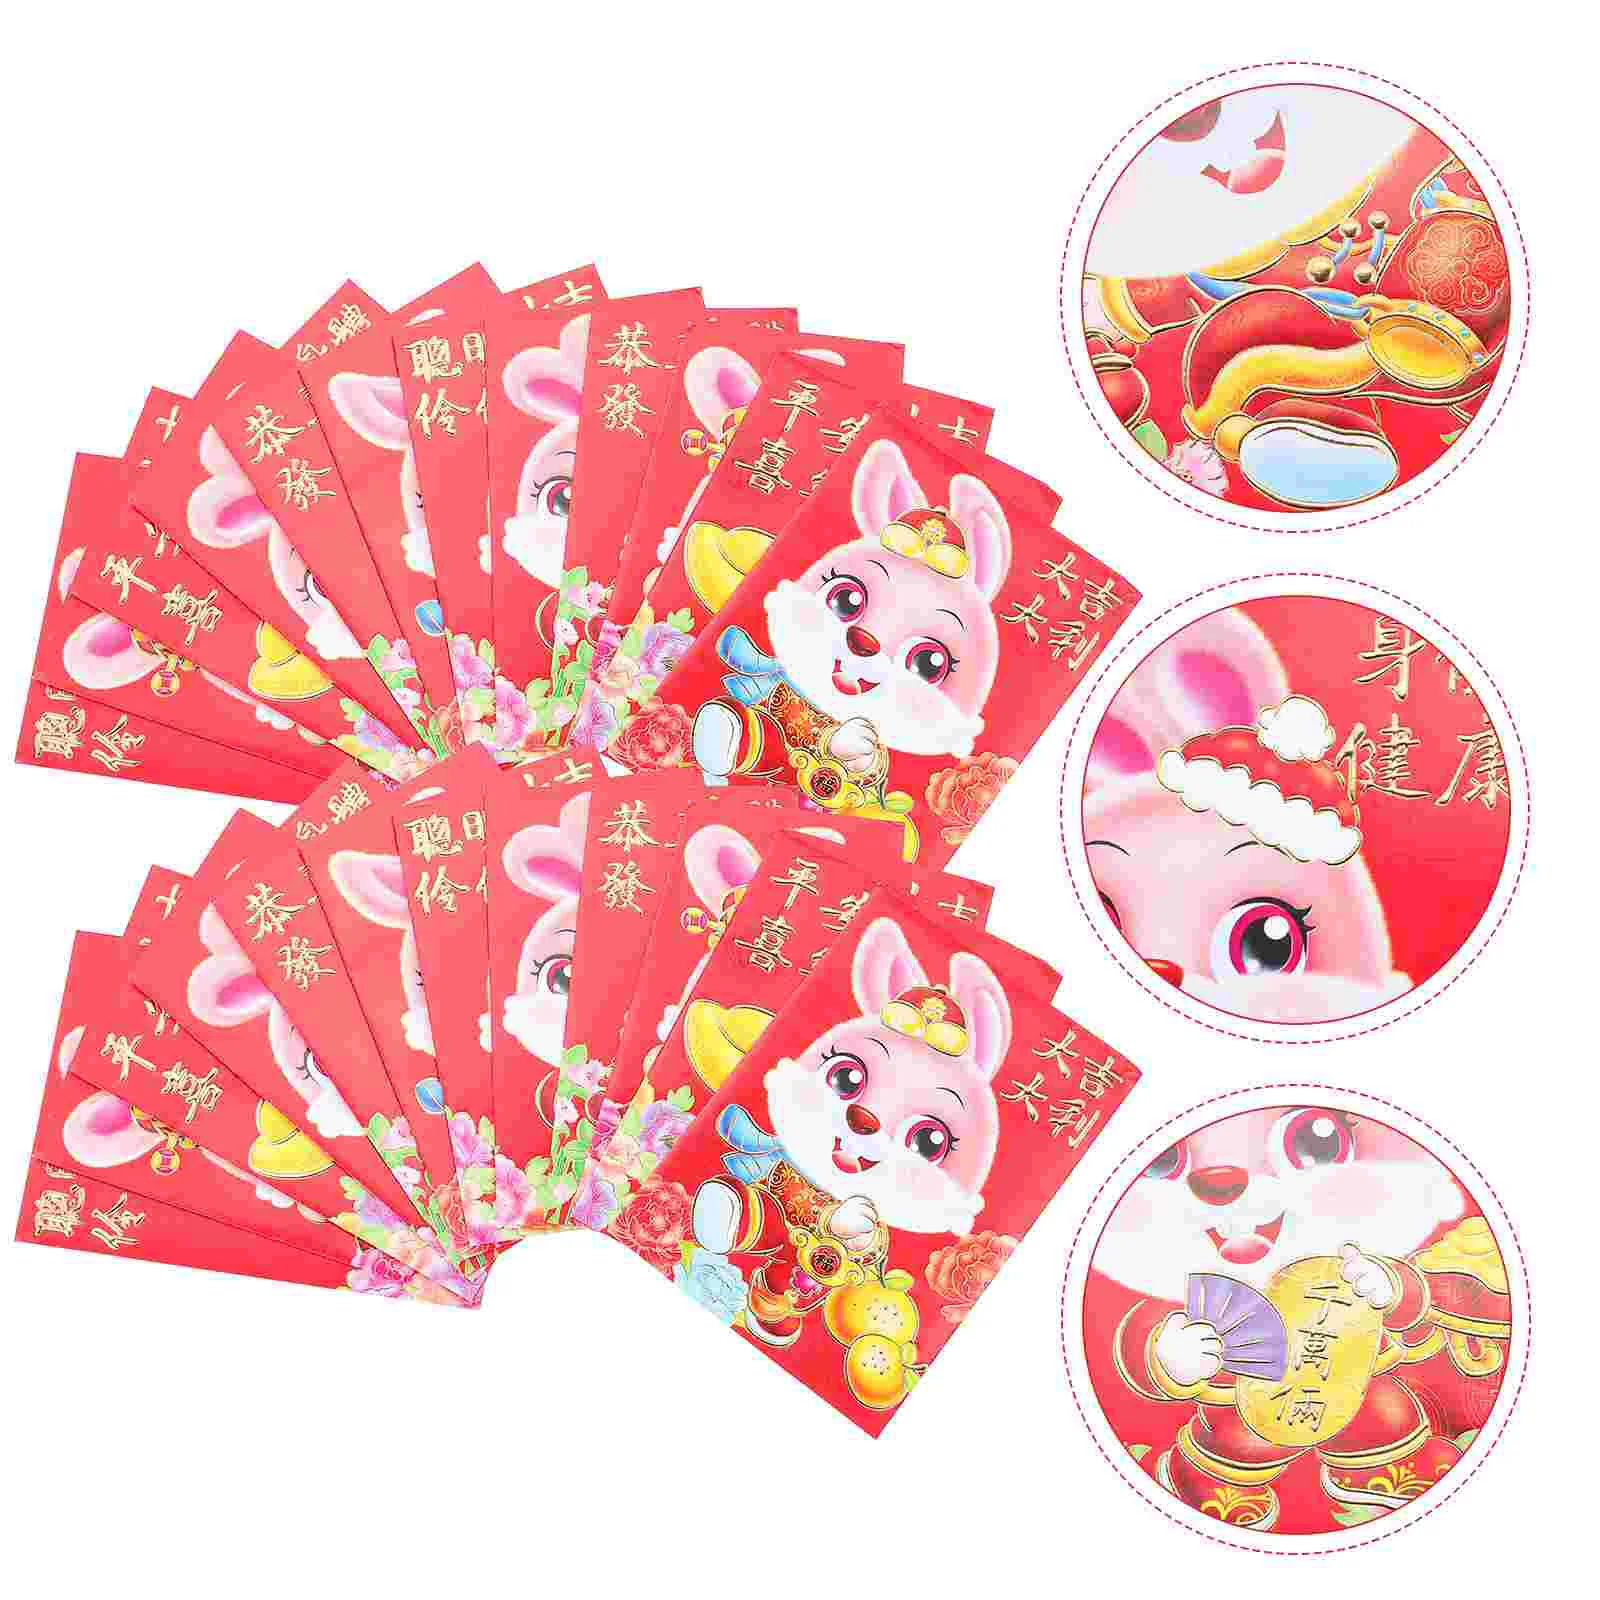 

Red Money Year Envelope Chinese Envelopes New Festival Spring Packet Bag Pocket Rabbit Lucky Packets Hongbao Wedding Luck Zodiac